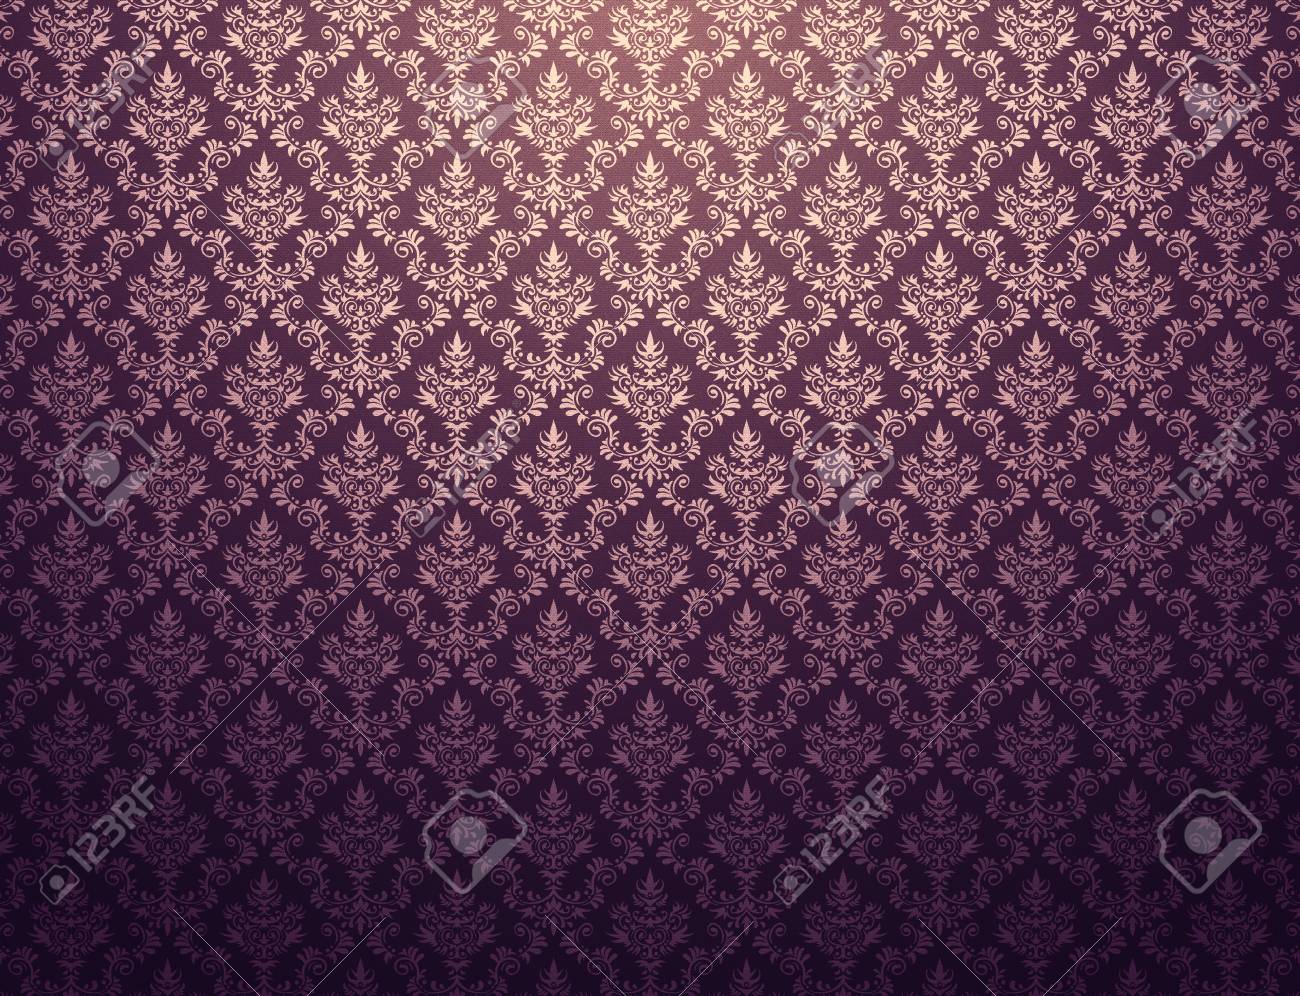 Purple Damask Wallpaper With Gold Floral Patterns Stock Photo